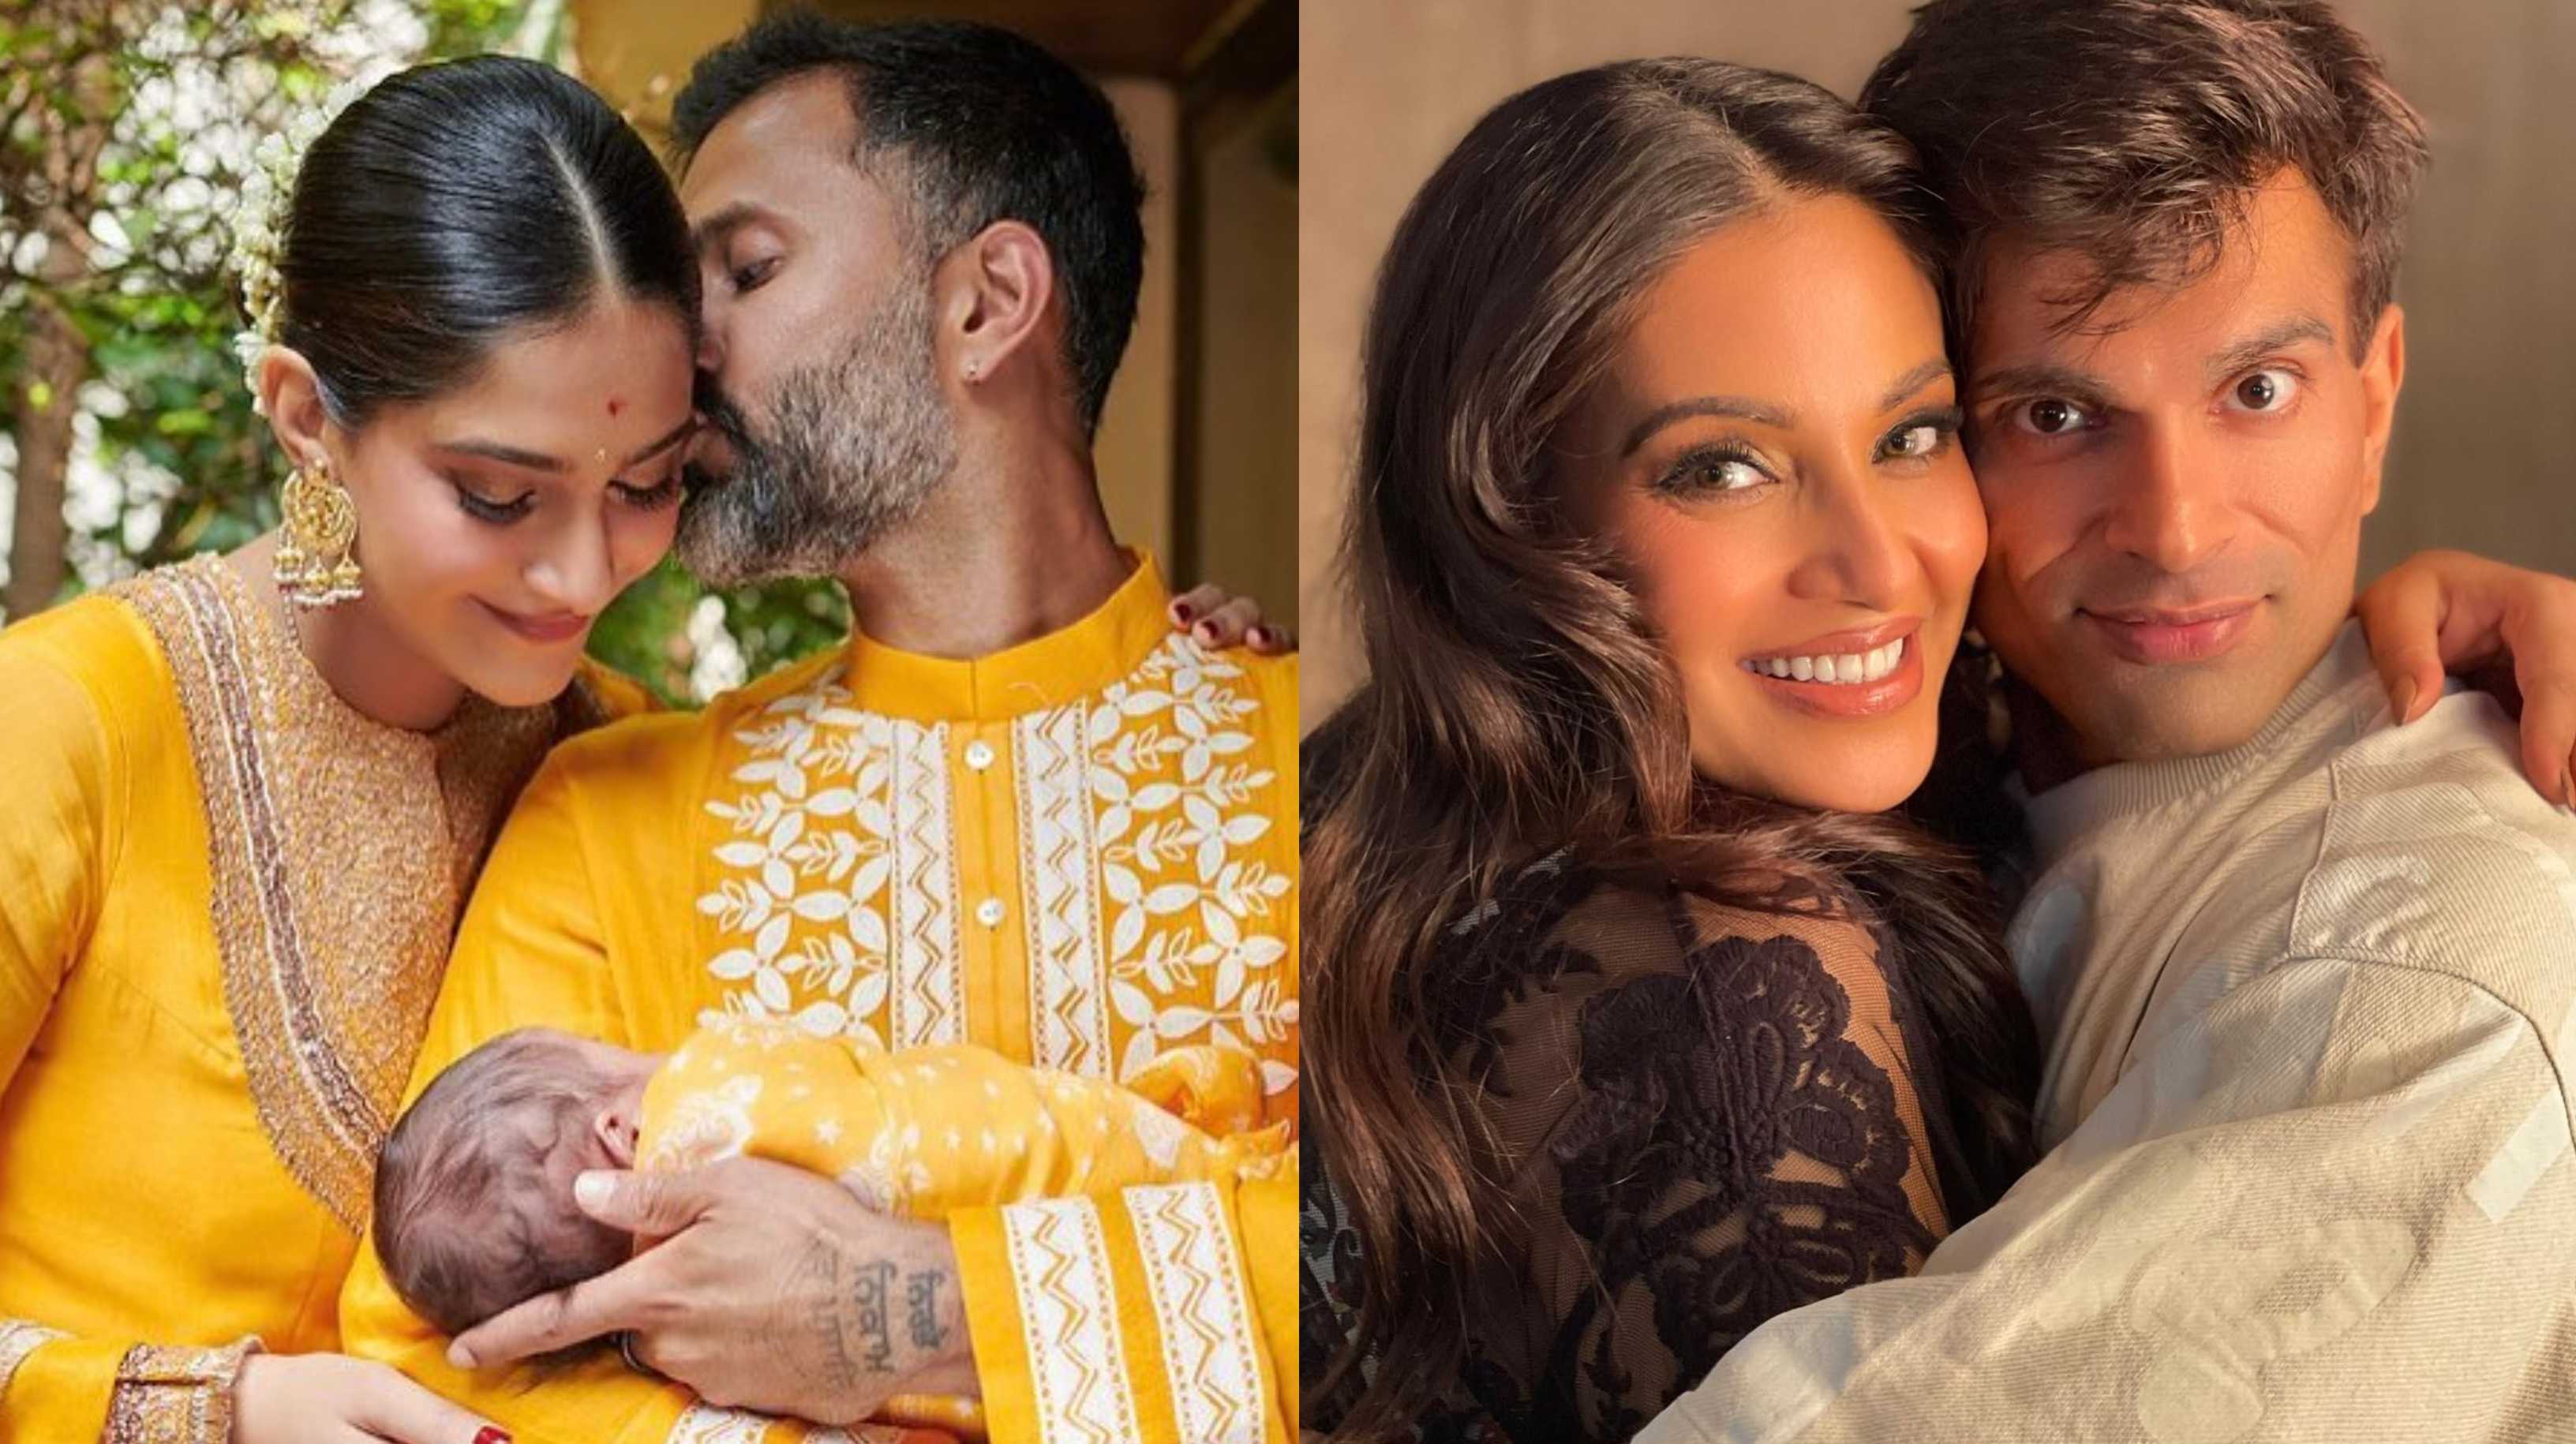 Sonam shares unseen snap of Vayu with daddy Anand; new parents Bipasha and Karan try to sneak in some romance